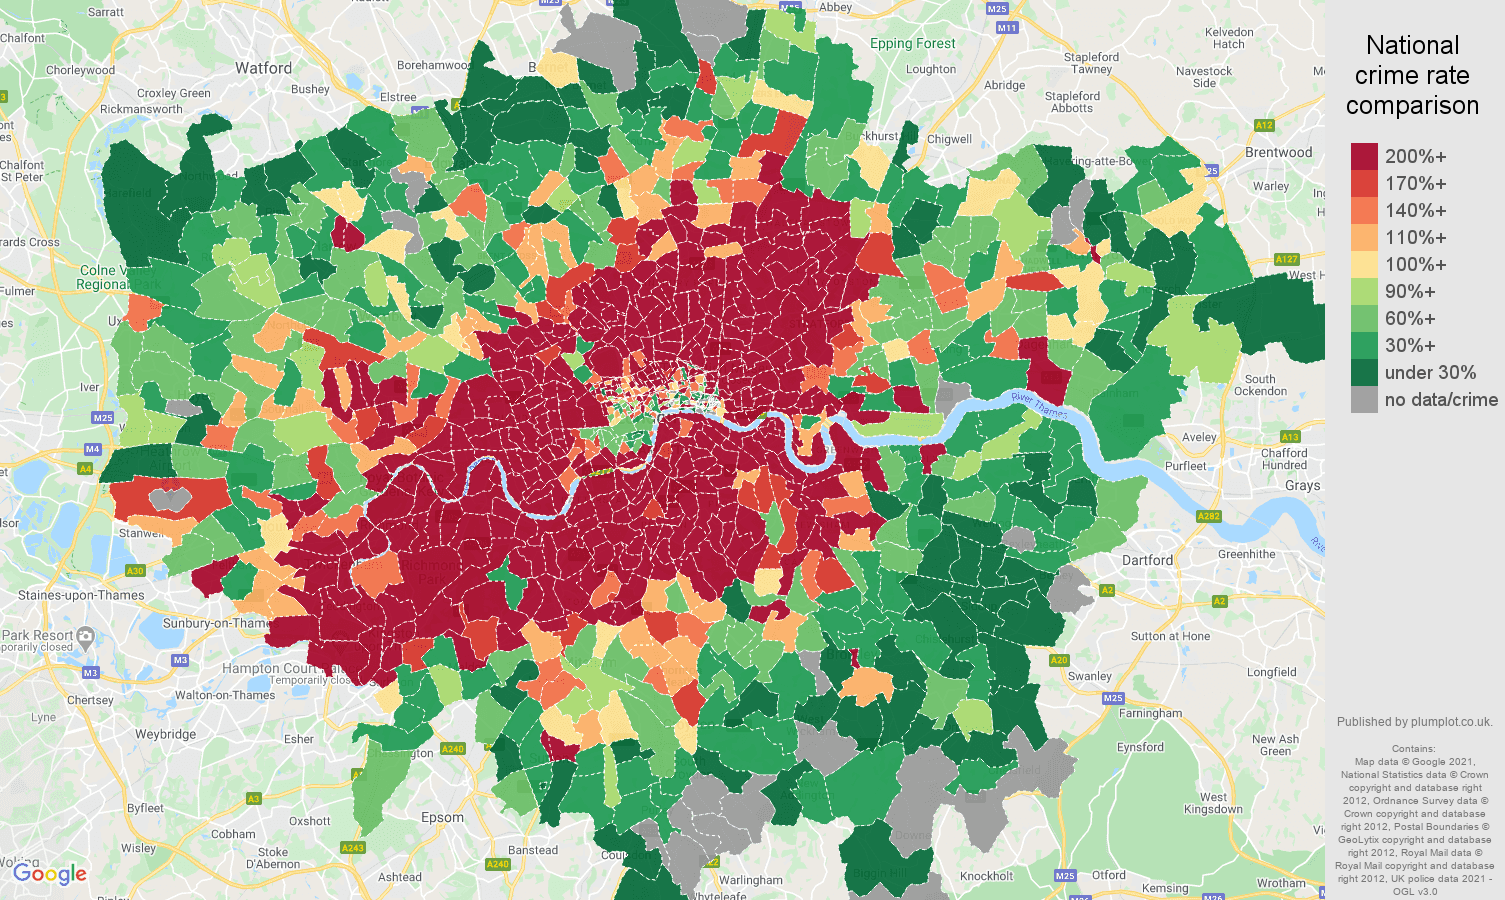 London bicycle theft crime rate comparison map